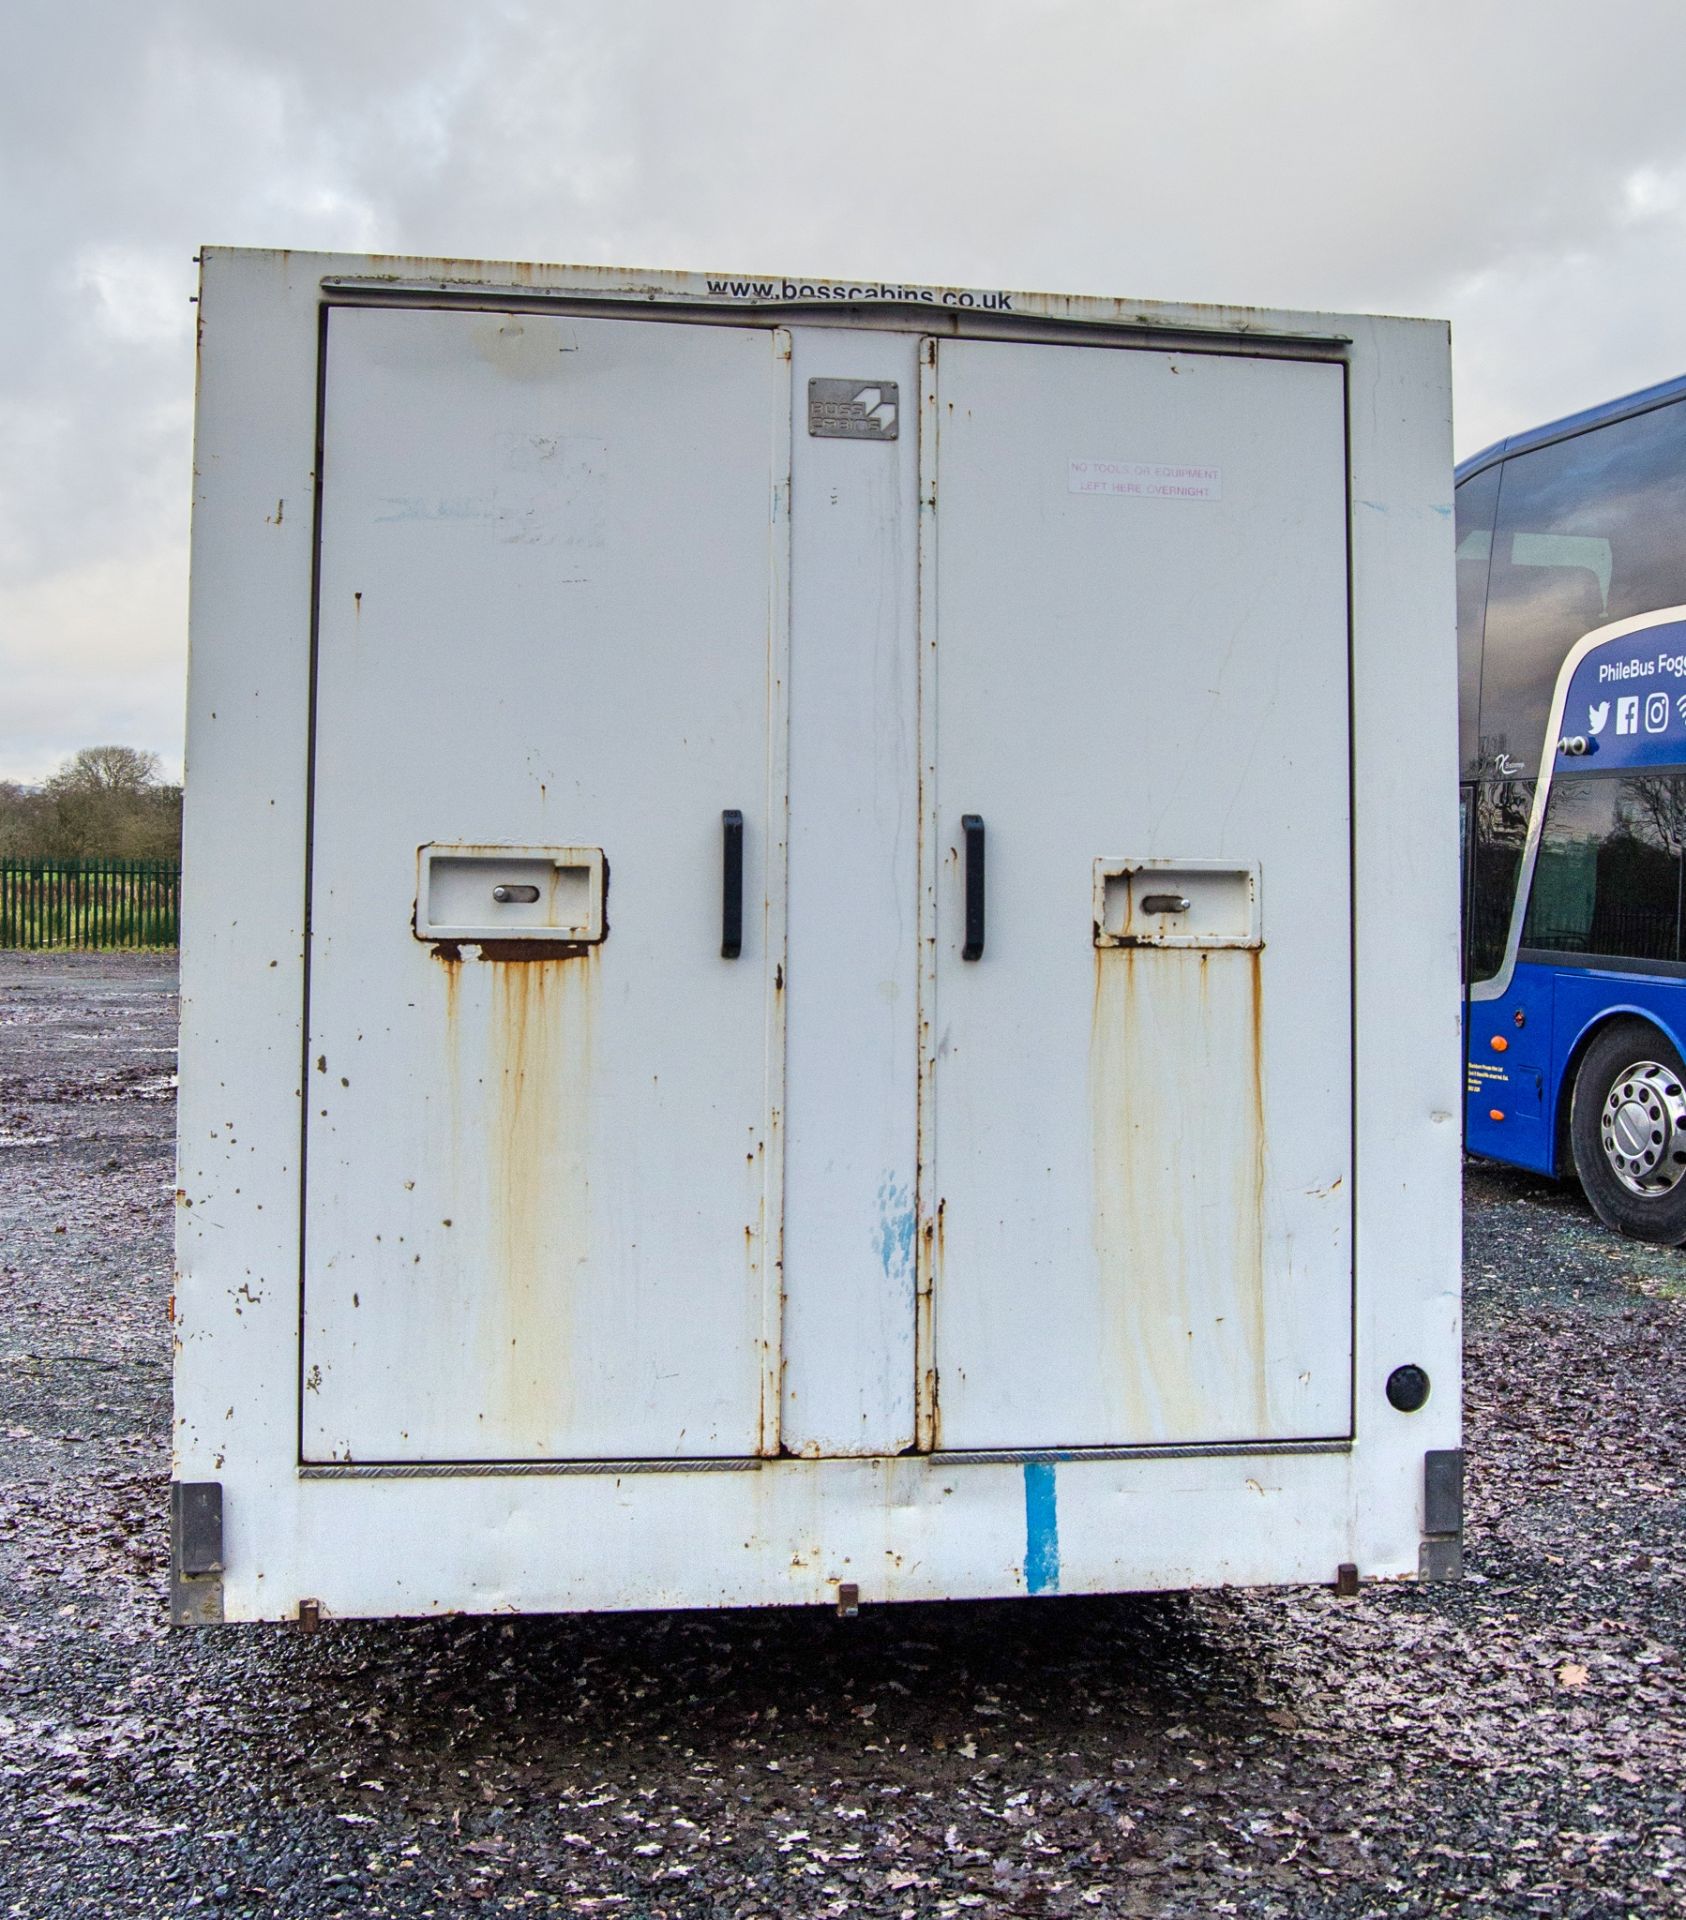 Boss Cabins 12 ft x 6 ft steel anti vandal mobile welfare site unit Comprising of: Canteen area, - Image 6 of 11